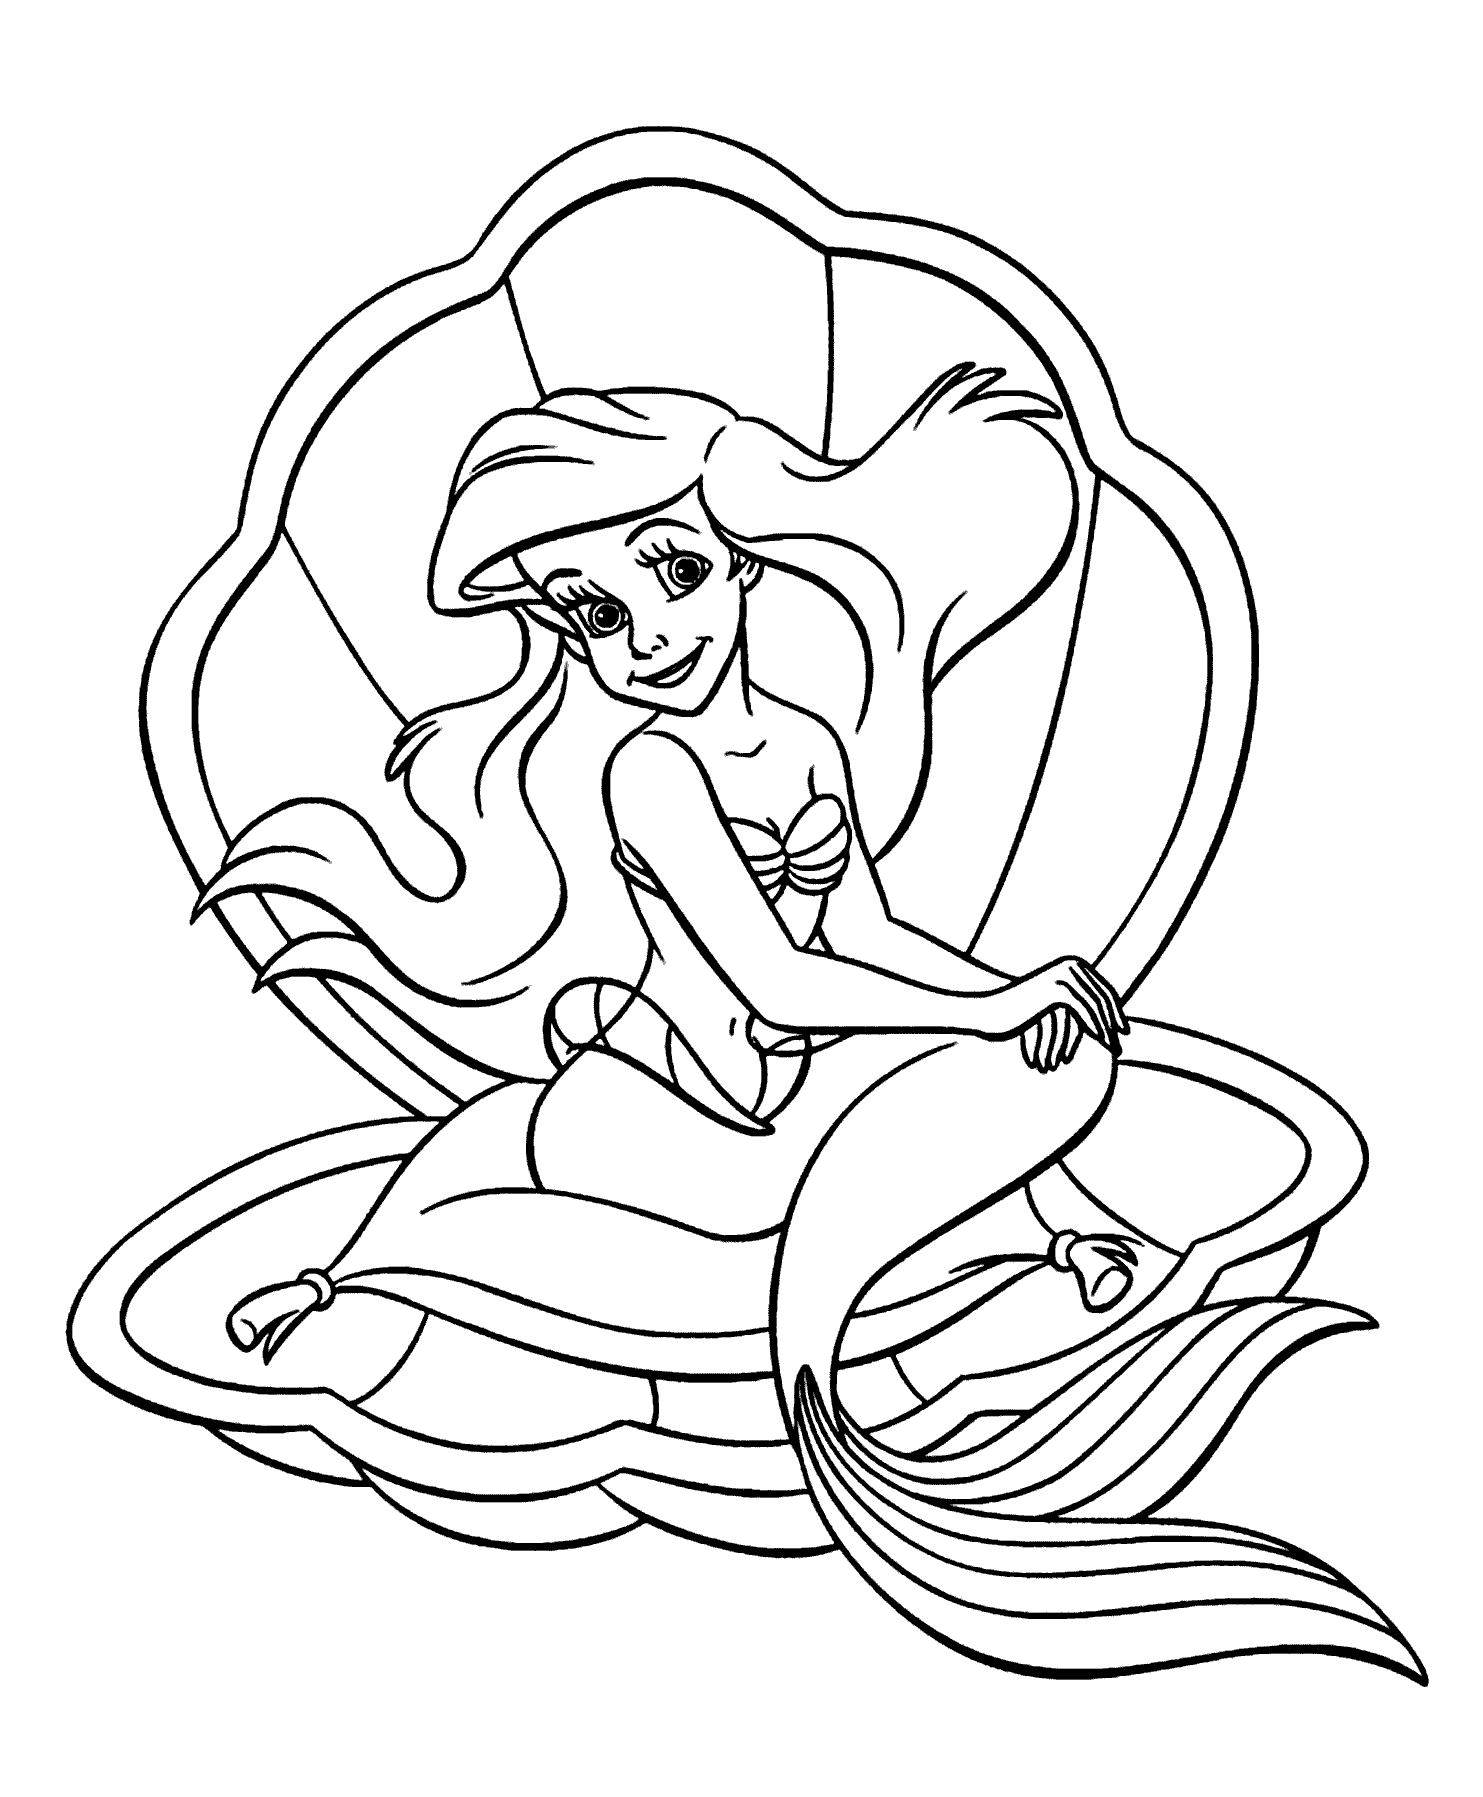 Ariel black and white clipart